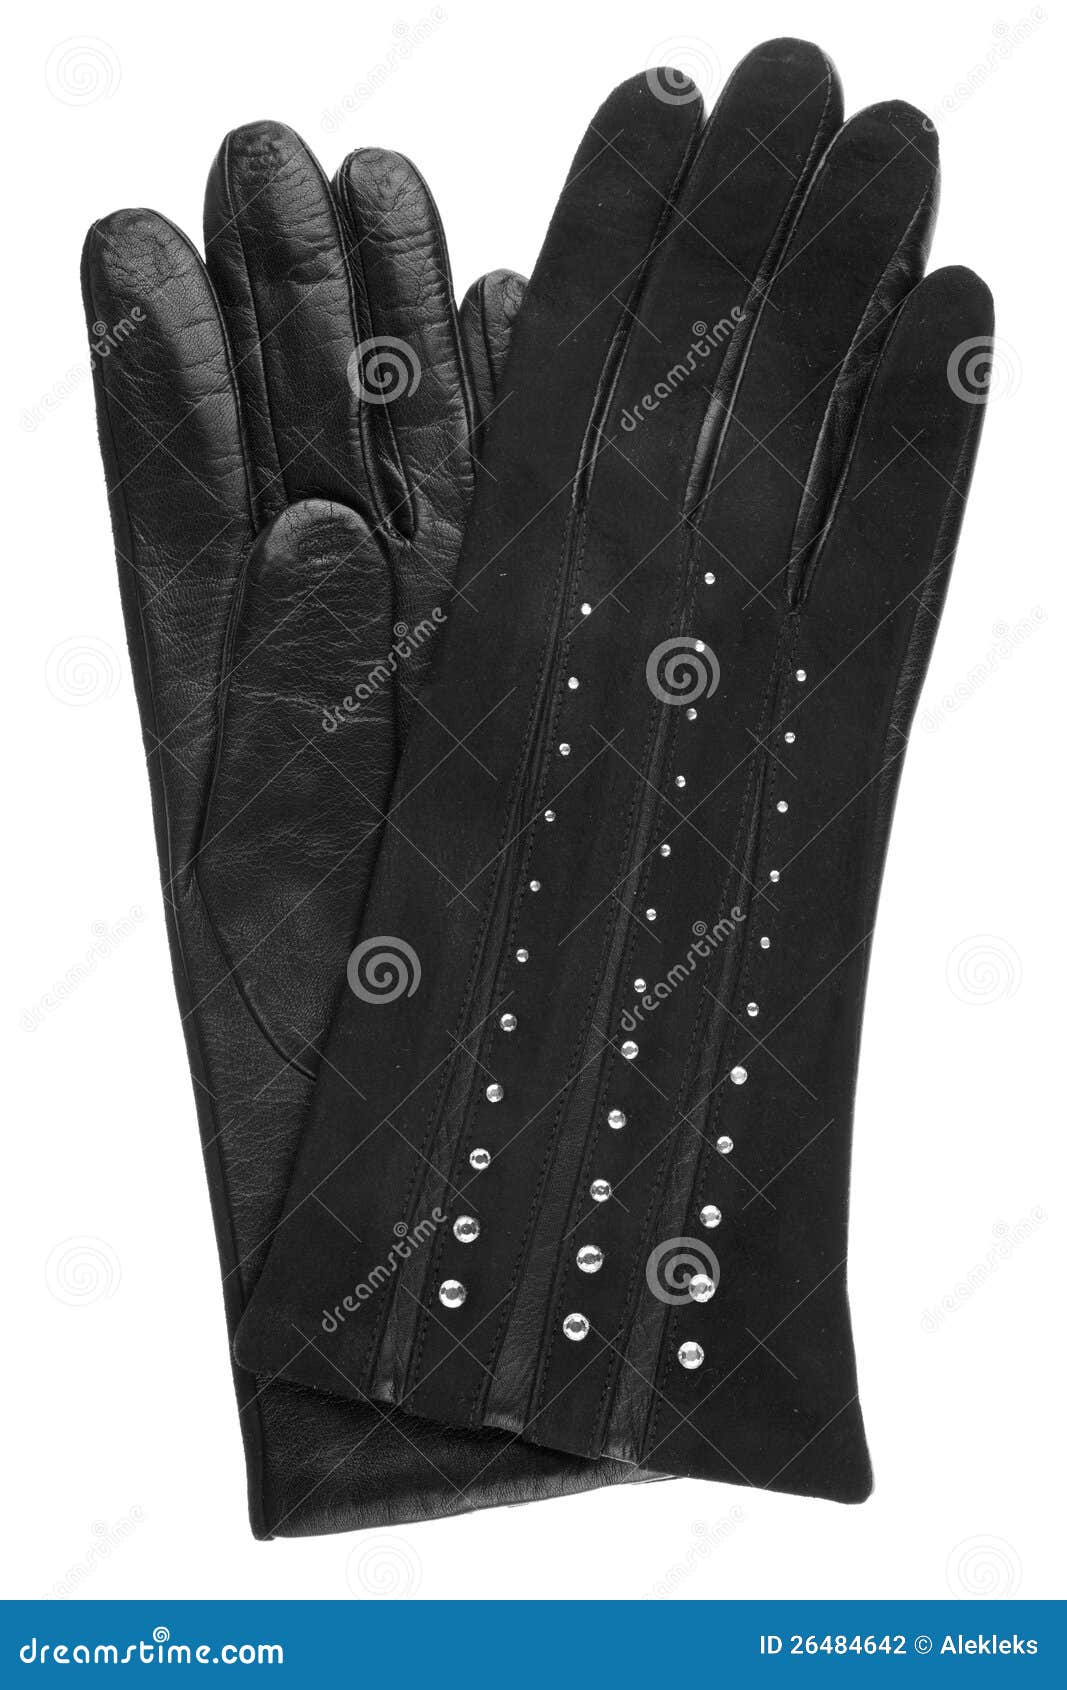 Women black leather gloves stock photo. Image of leather - 26484642